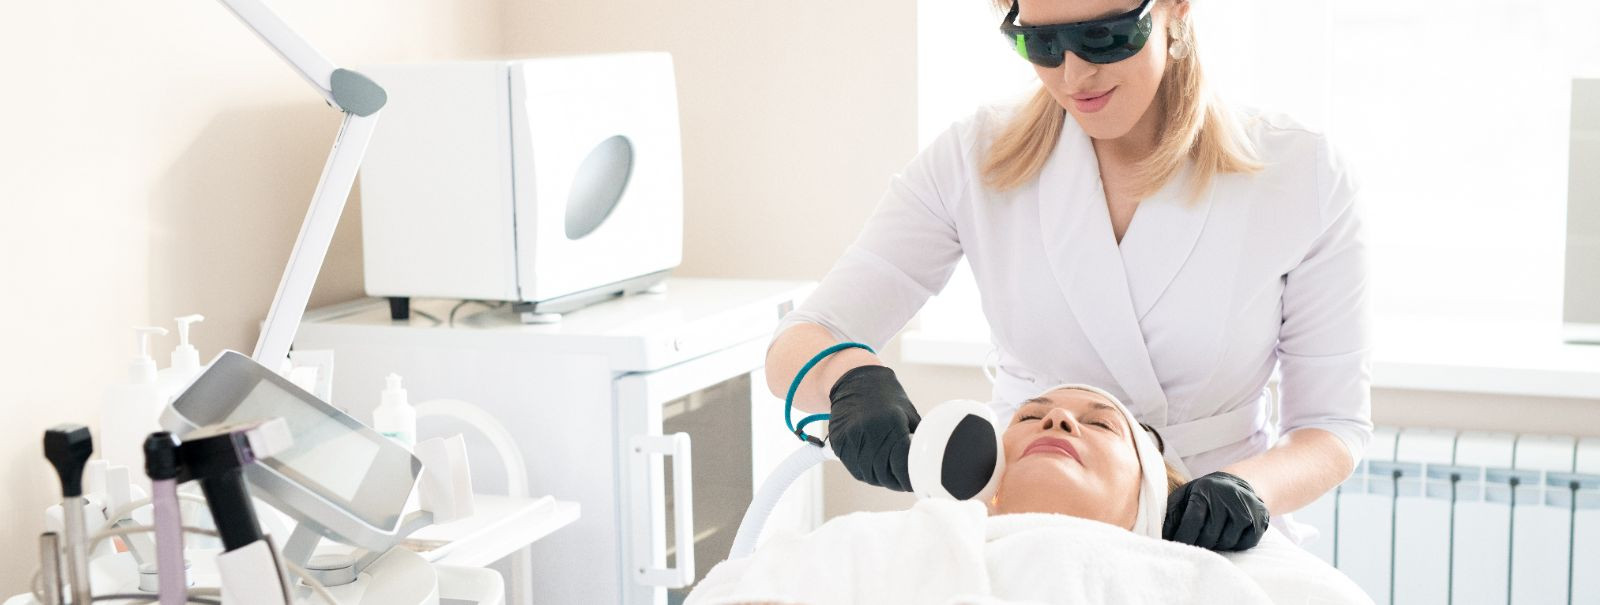 Morpheus8 is a cutting-edge skin tightening and rejuvenation treatment that combines micro-needling with fractional radiofrequency (RF) technology. This minimal